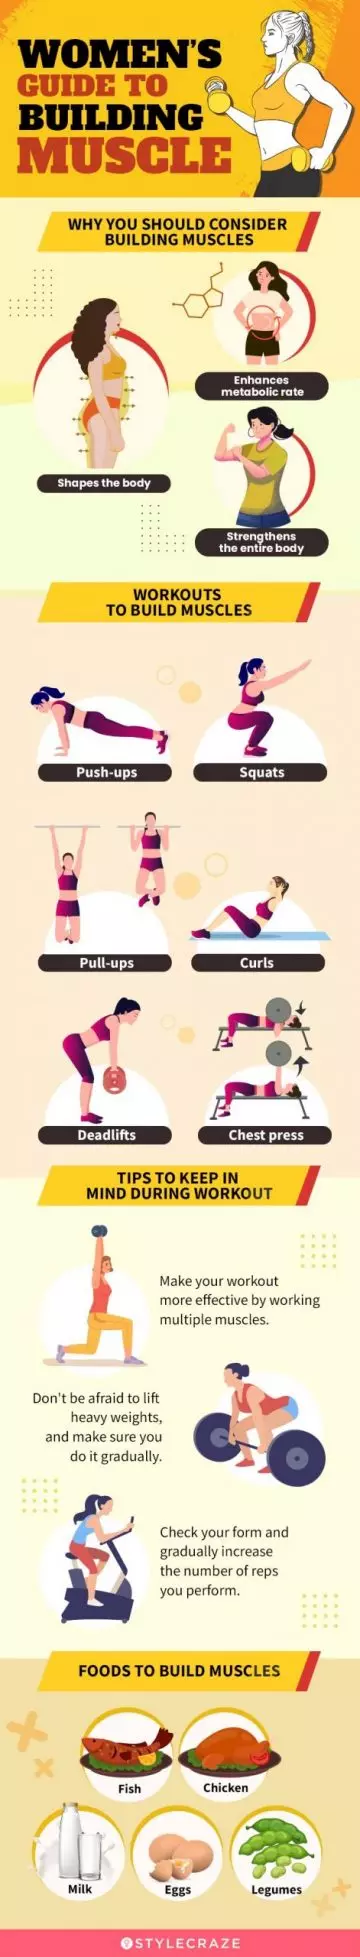 best ways for building muscle for women (infographic)